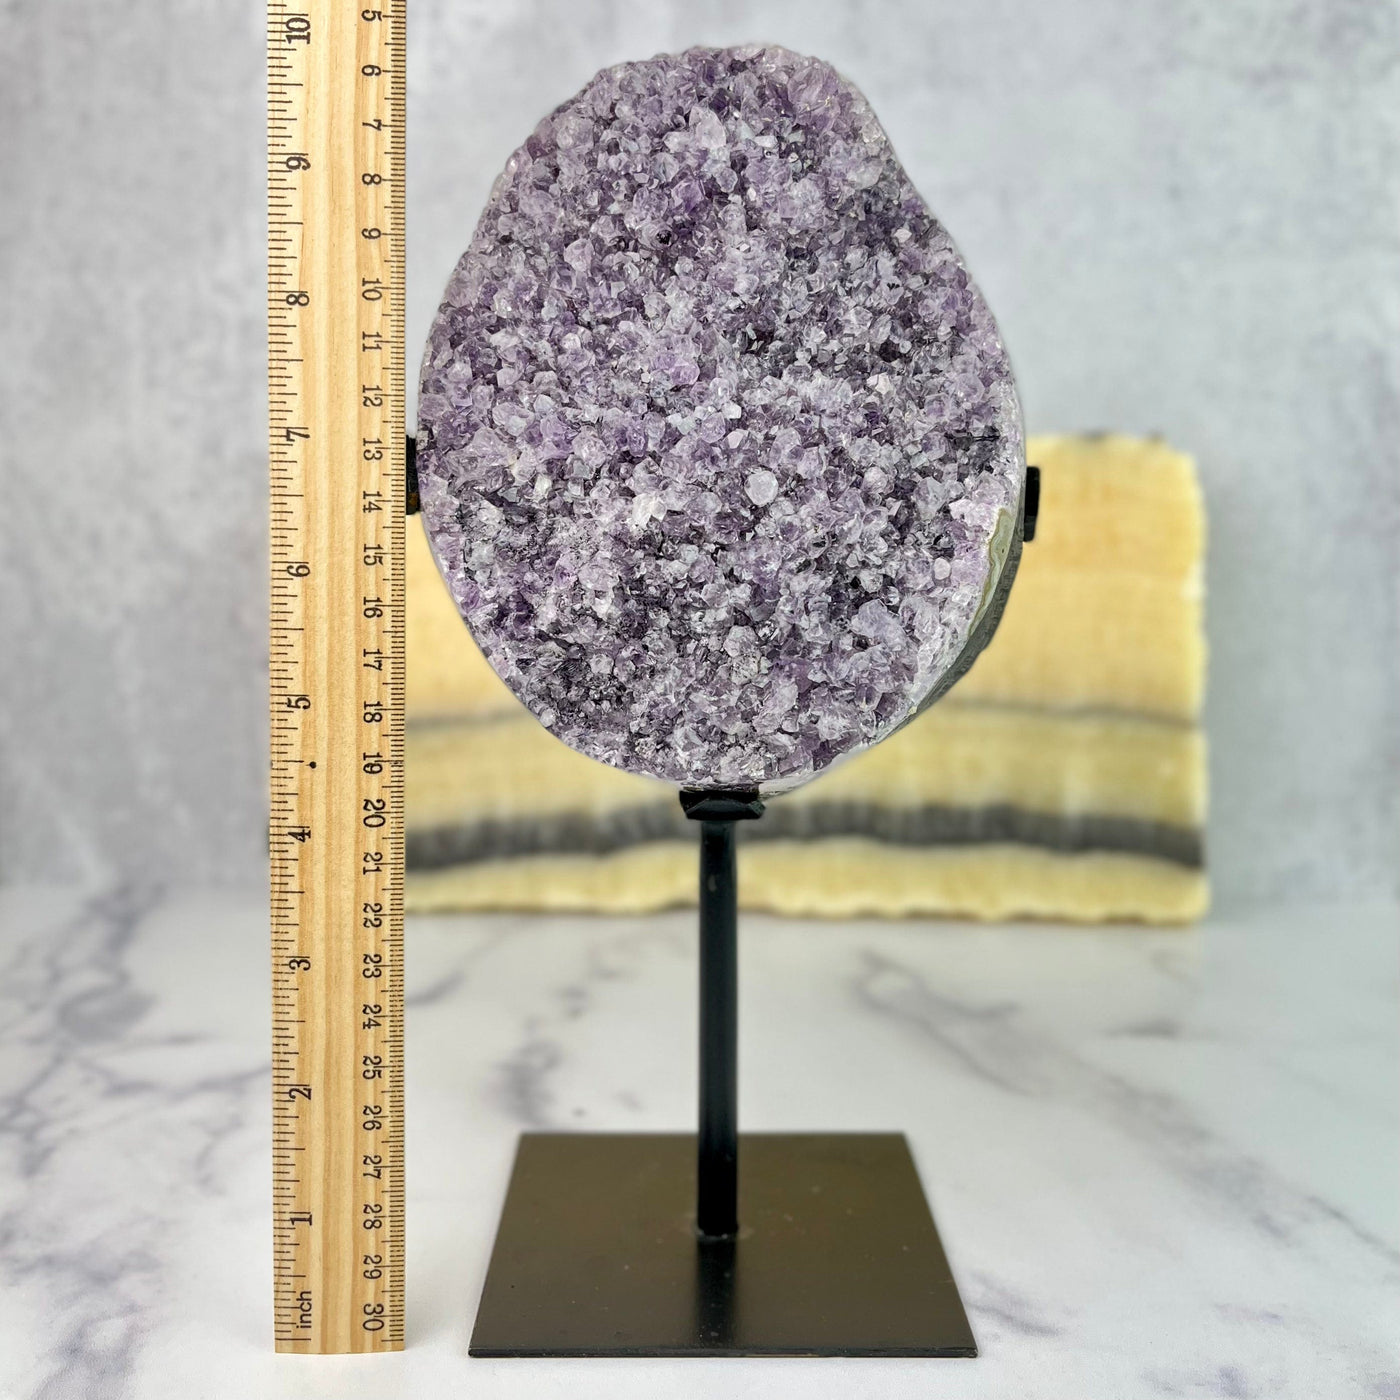 Frontal view of Oval Amethyst Crystal Cluster on Metal Stand next to ruler for size reference